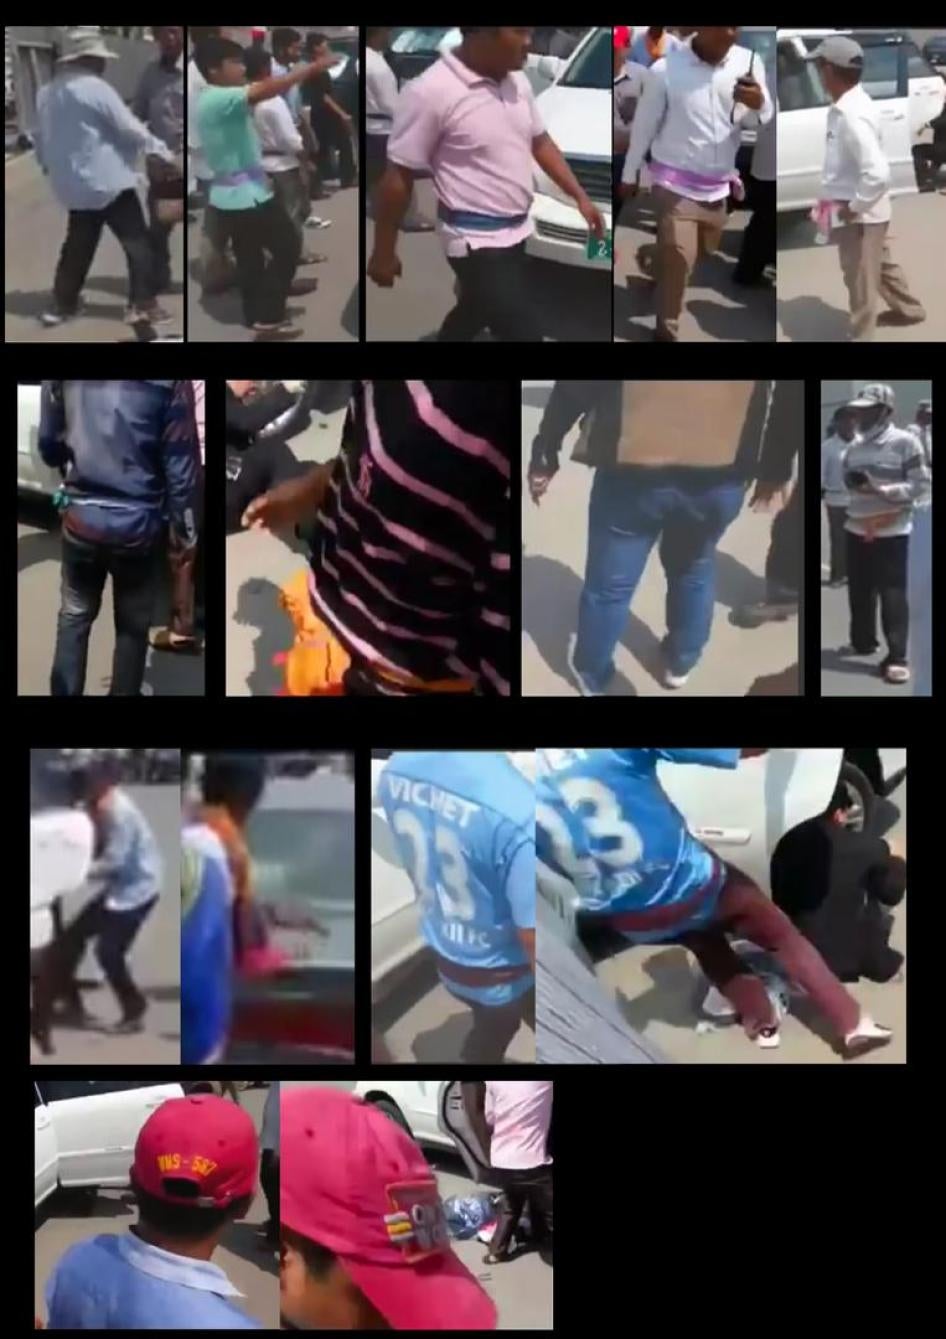 Images from Video 1 Showing Some of the Additional “Hands-on Perpetrators”. 